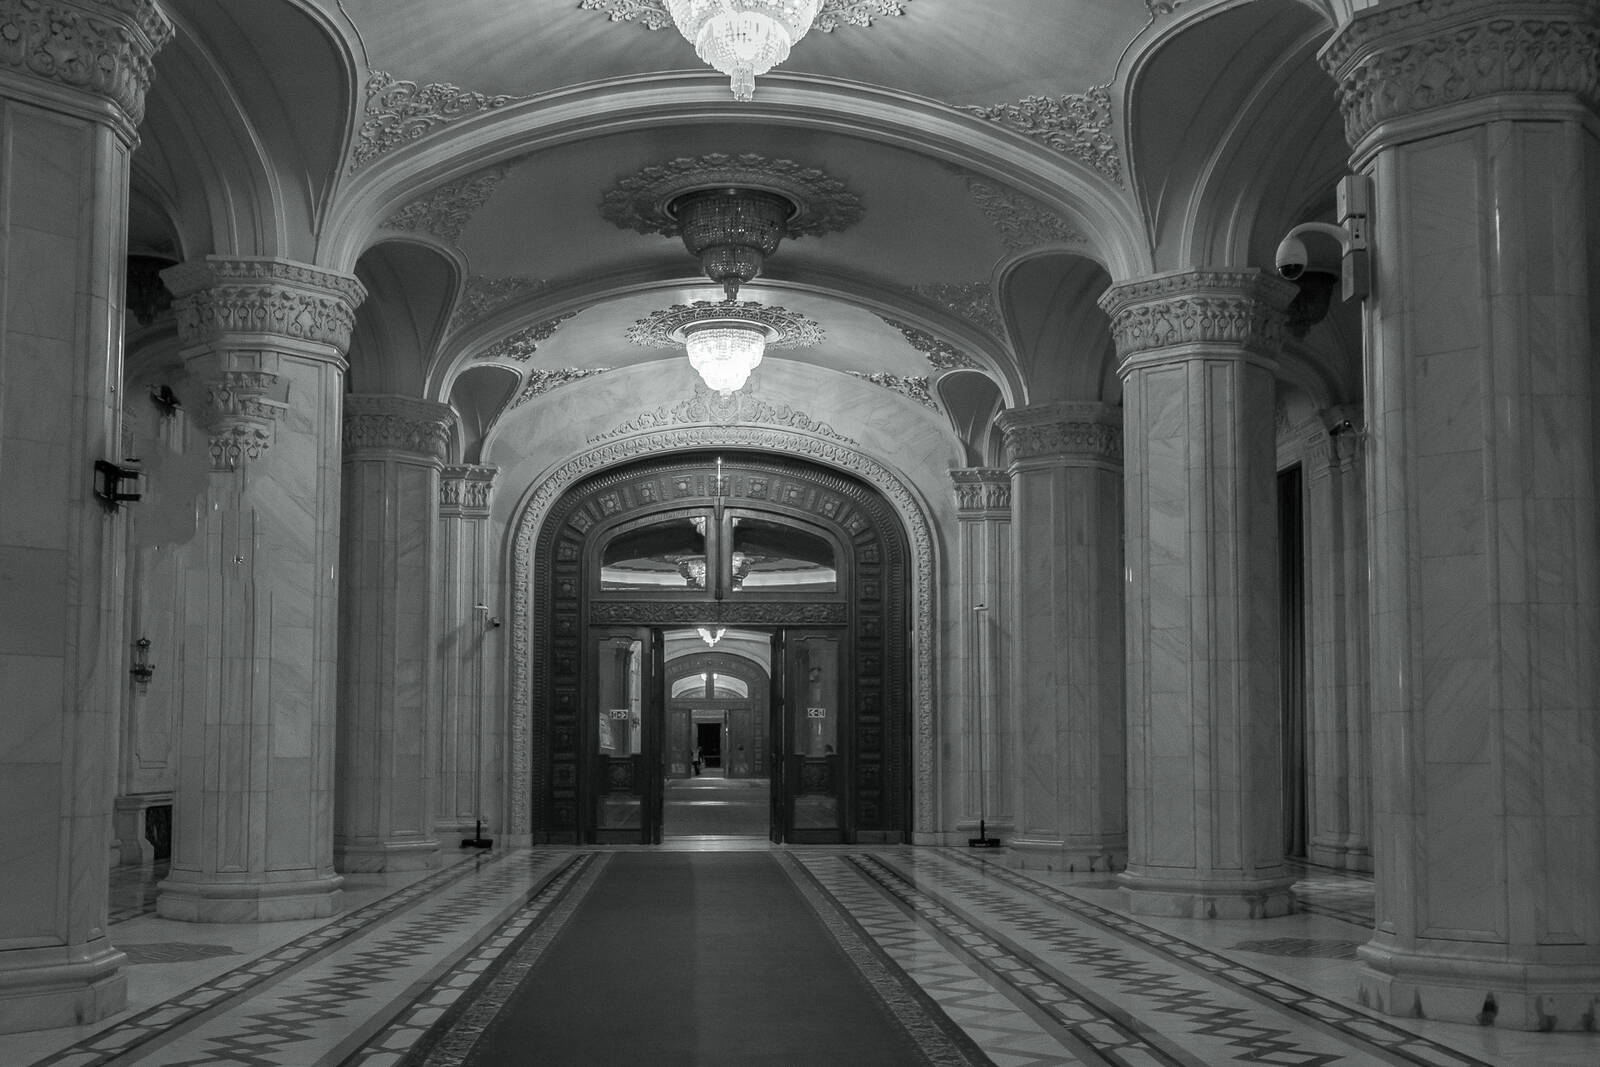 Image of Palace of Parliament (Interior) by Janina Wilde